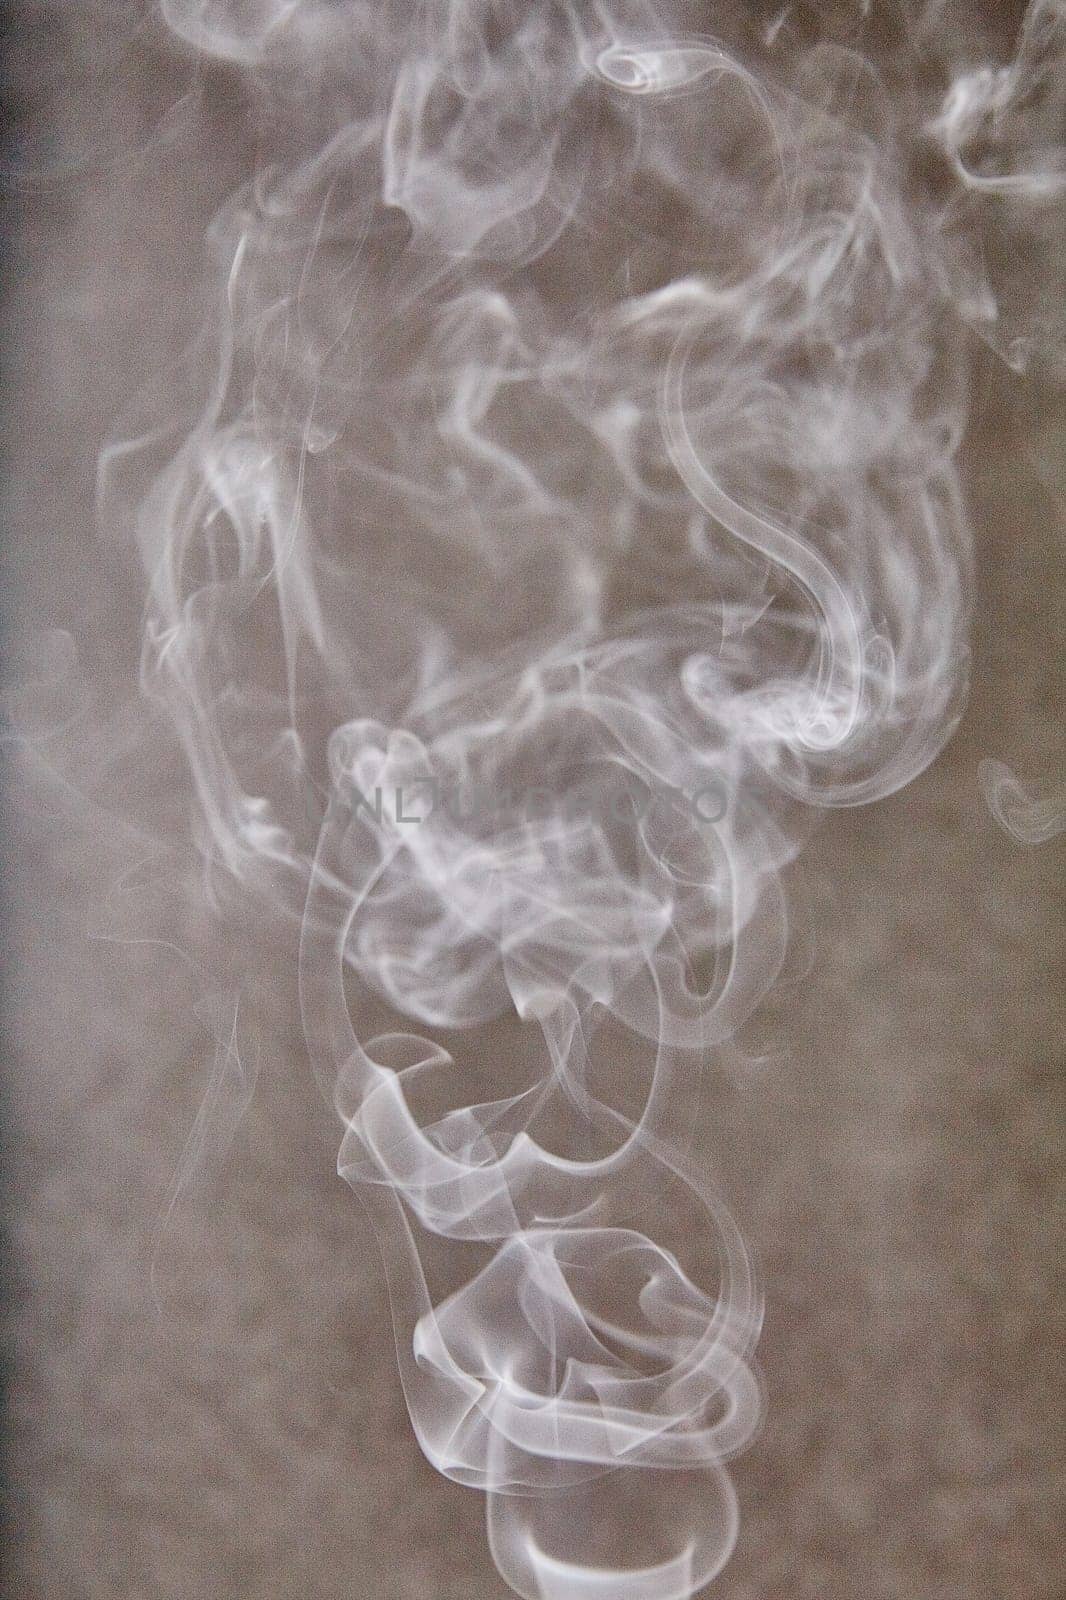 Ethereal Dance of Incense Smoke in High Speed Capture by njproductions